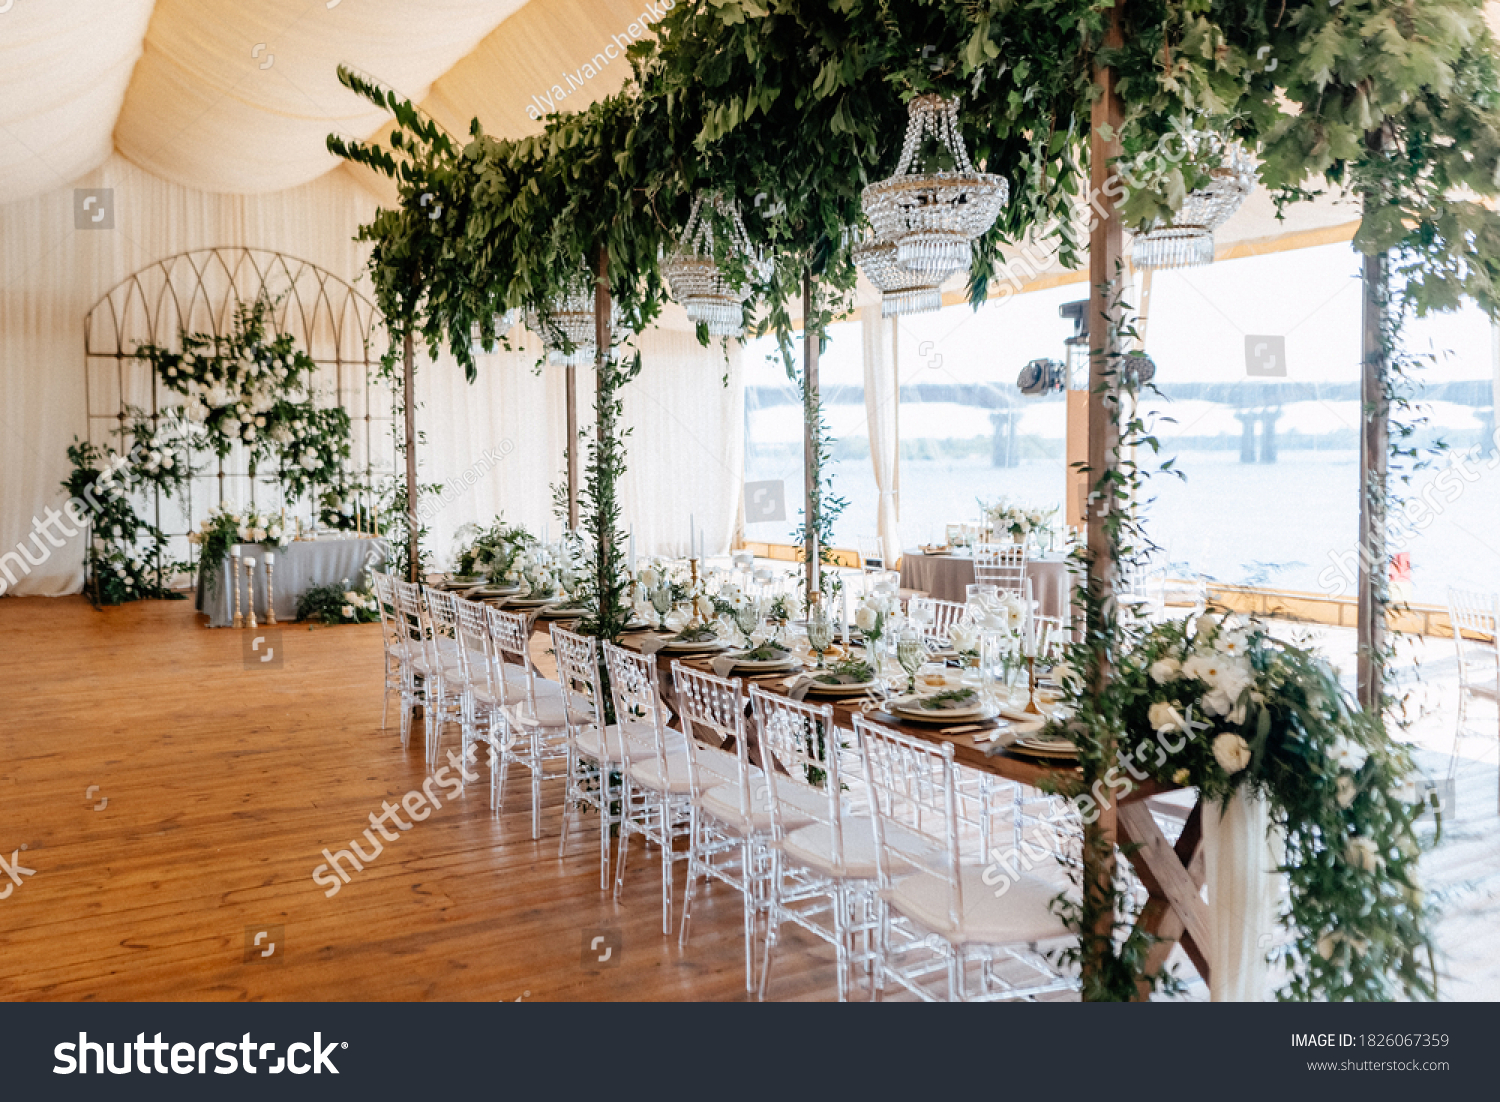 Banquet tables decorated with arrangements of flowers, herbs and candles in the tent. Wedding. Banquet.Crystal chandeliers hang from above #1826067359